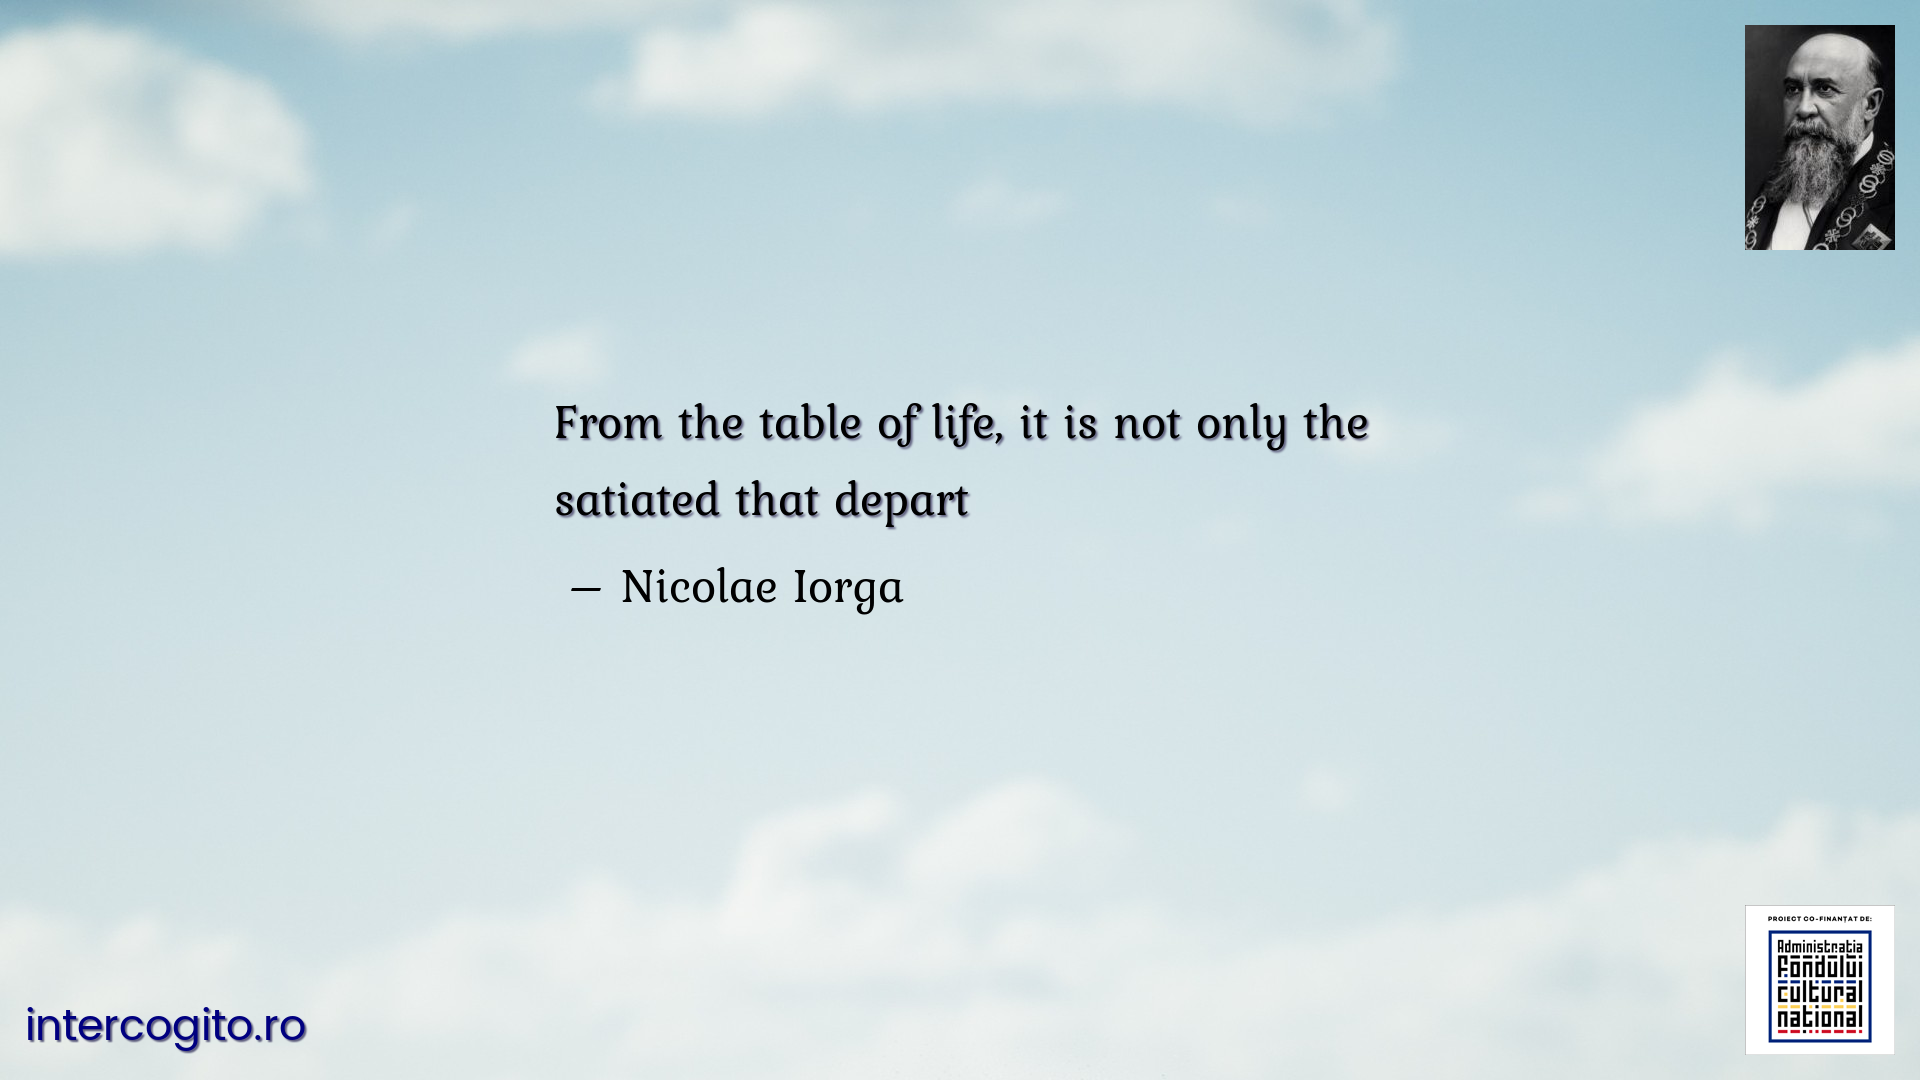 From the table of life, it is not only the satiated that depart